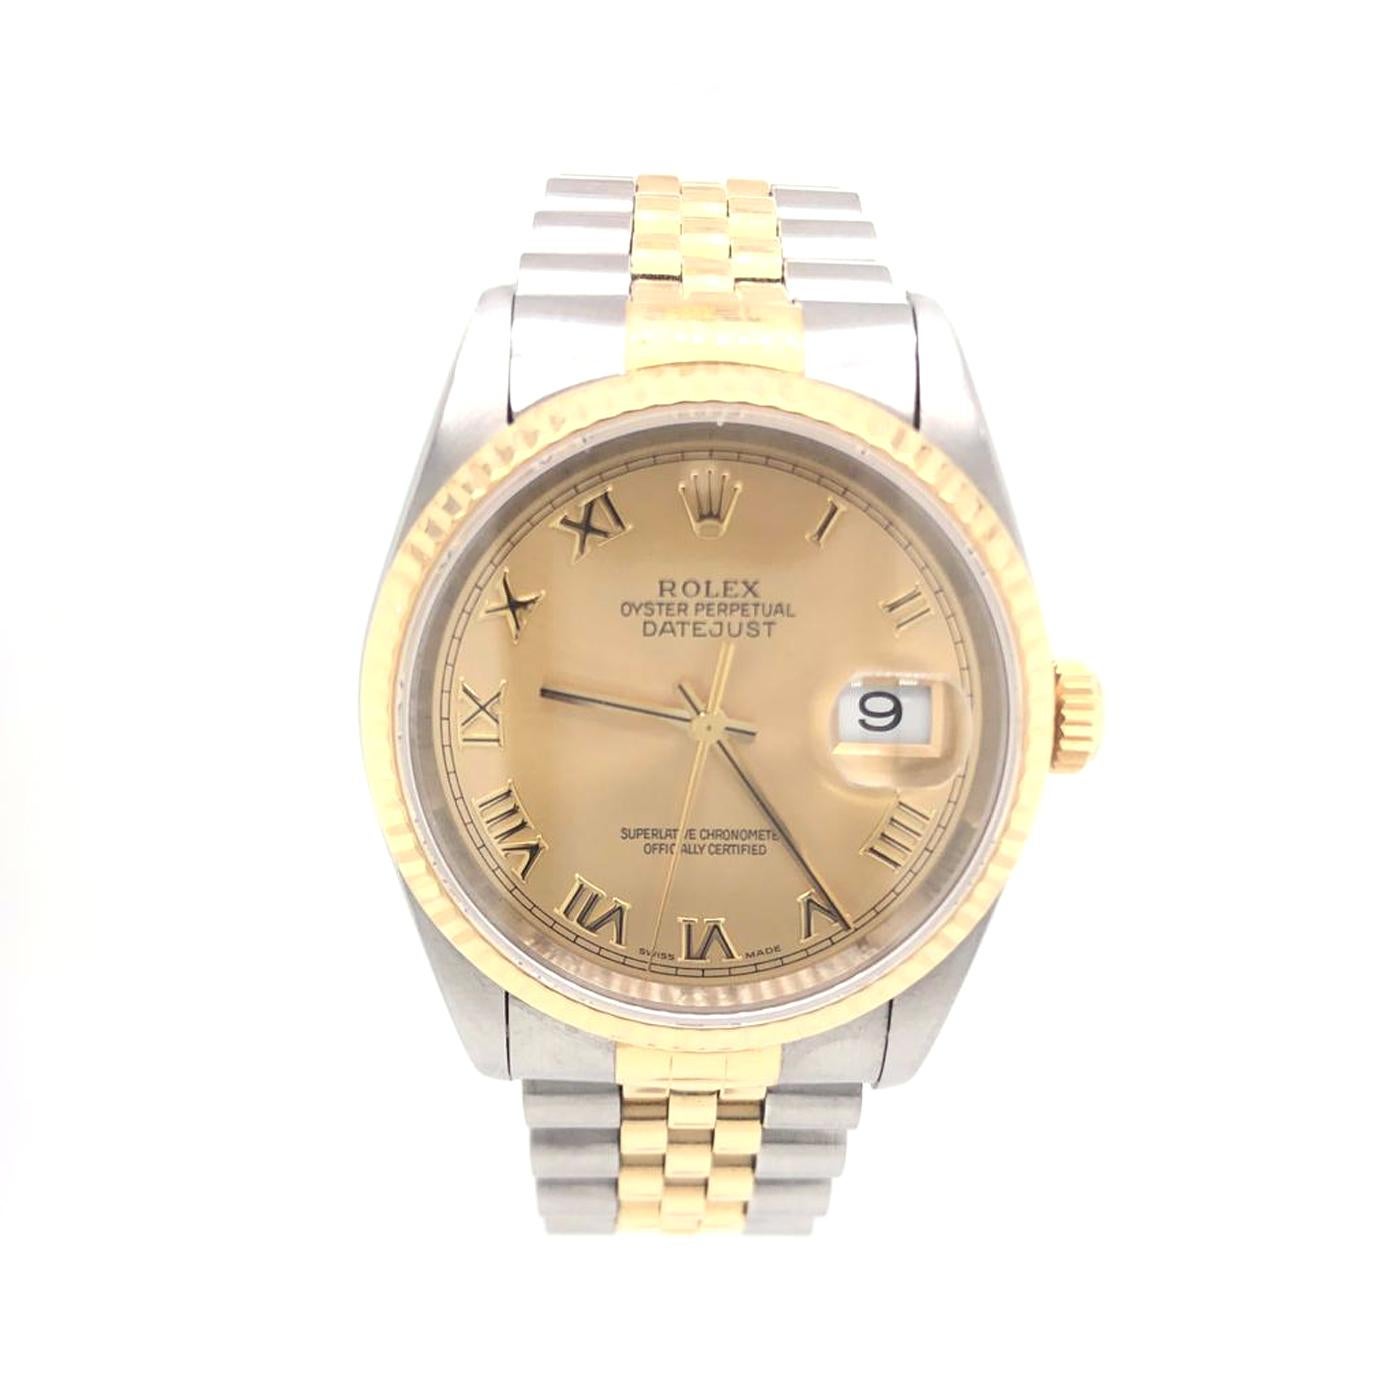 Silver-Tone stainless steel case with a two-tone (silver-tone and gold-tone) yellow gold/stainless steel bracelet. Yellow gold fluted bezel. Gold dial with gold-tone hands and index hour markers. Minute markers around the outer rim. Dial Type: